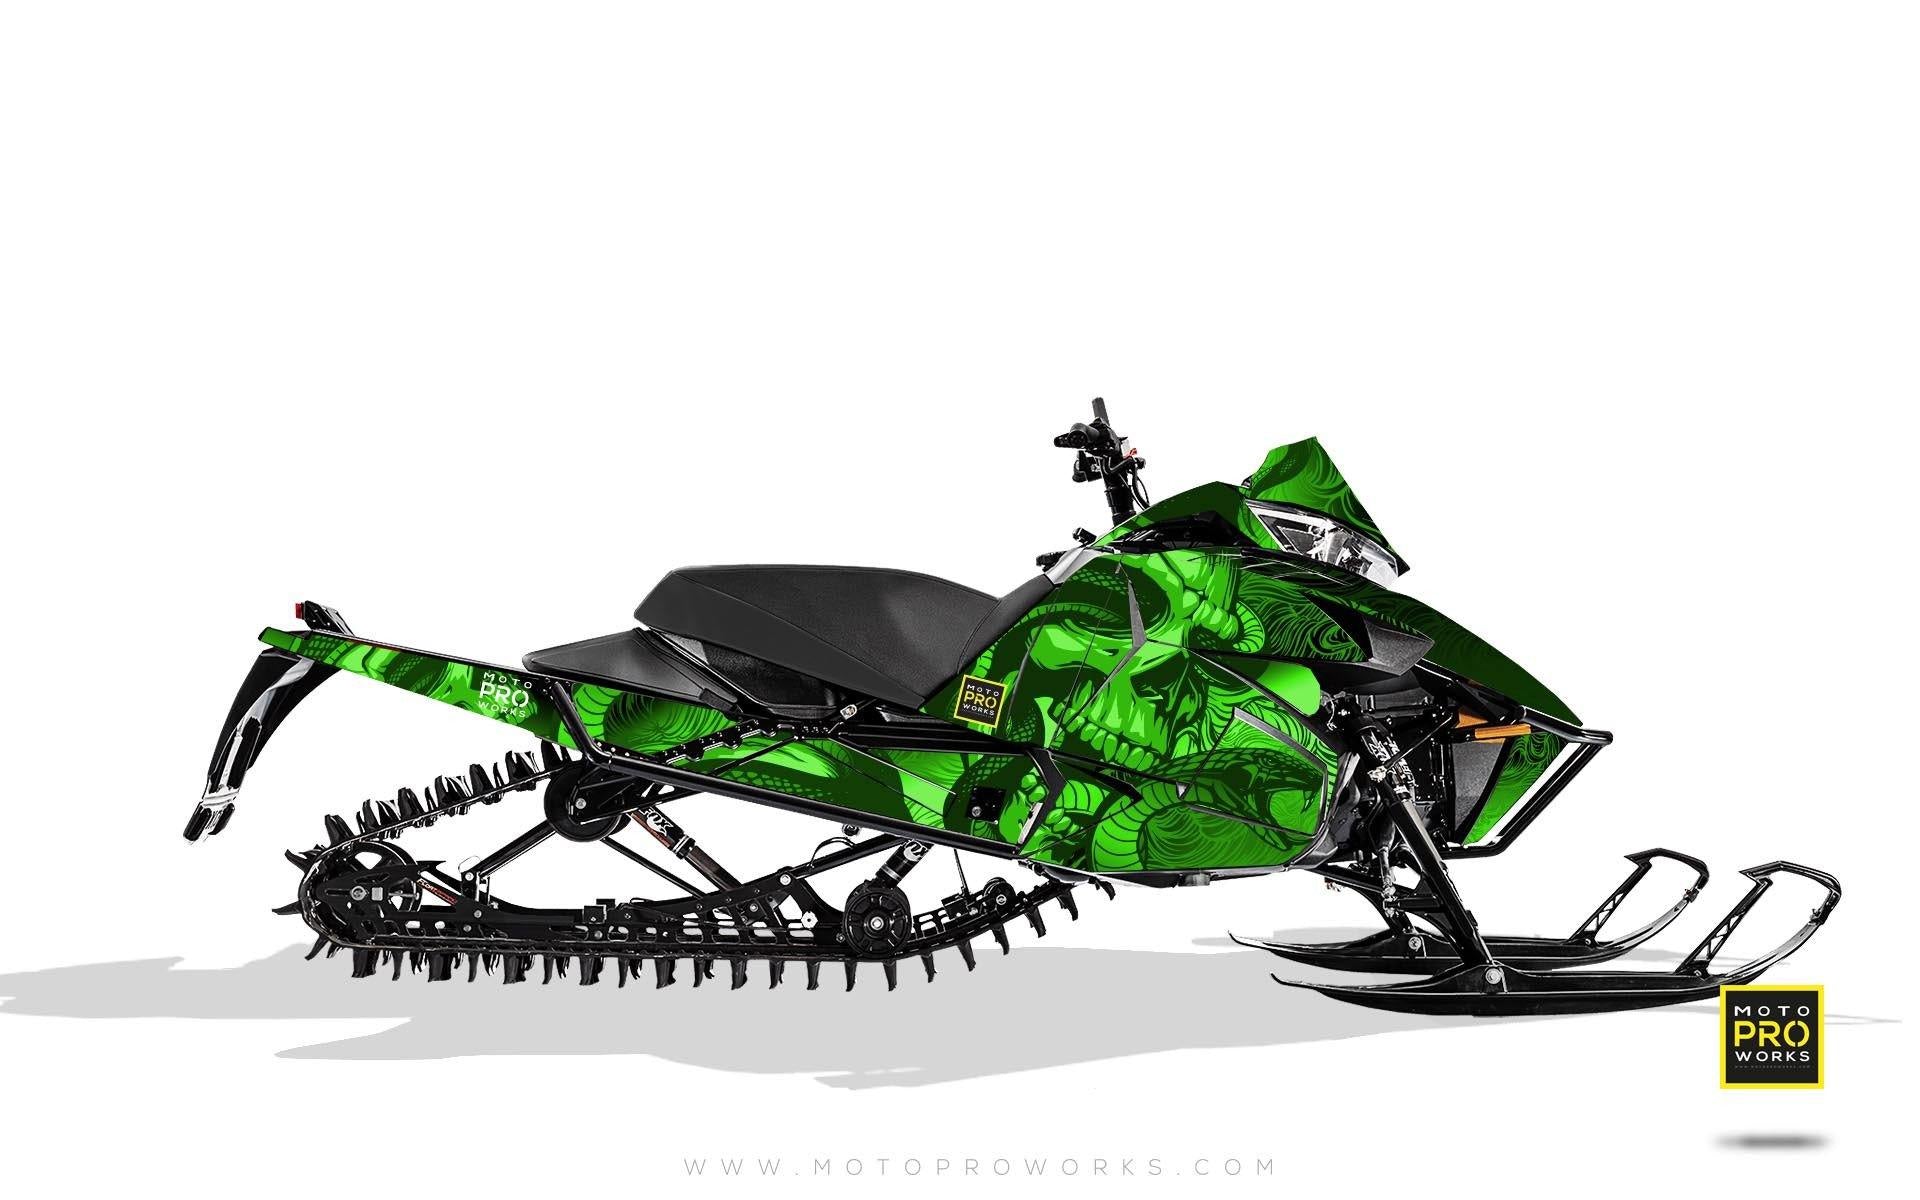 Arctic Cat Graphics - "Ssskully" (green) - MotoProWorks | Decals and Bike Graphic kit